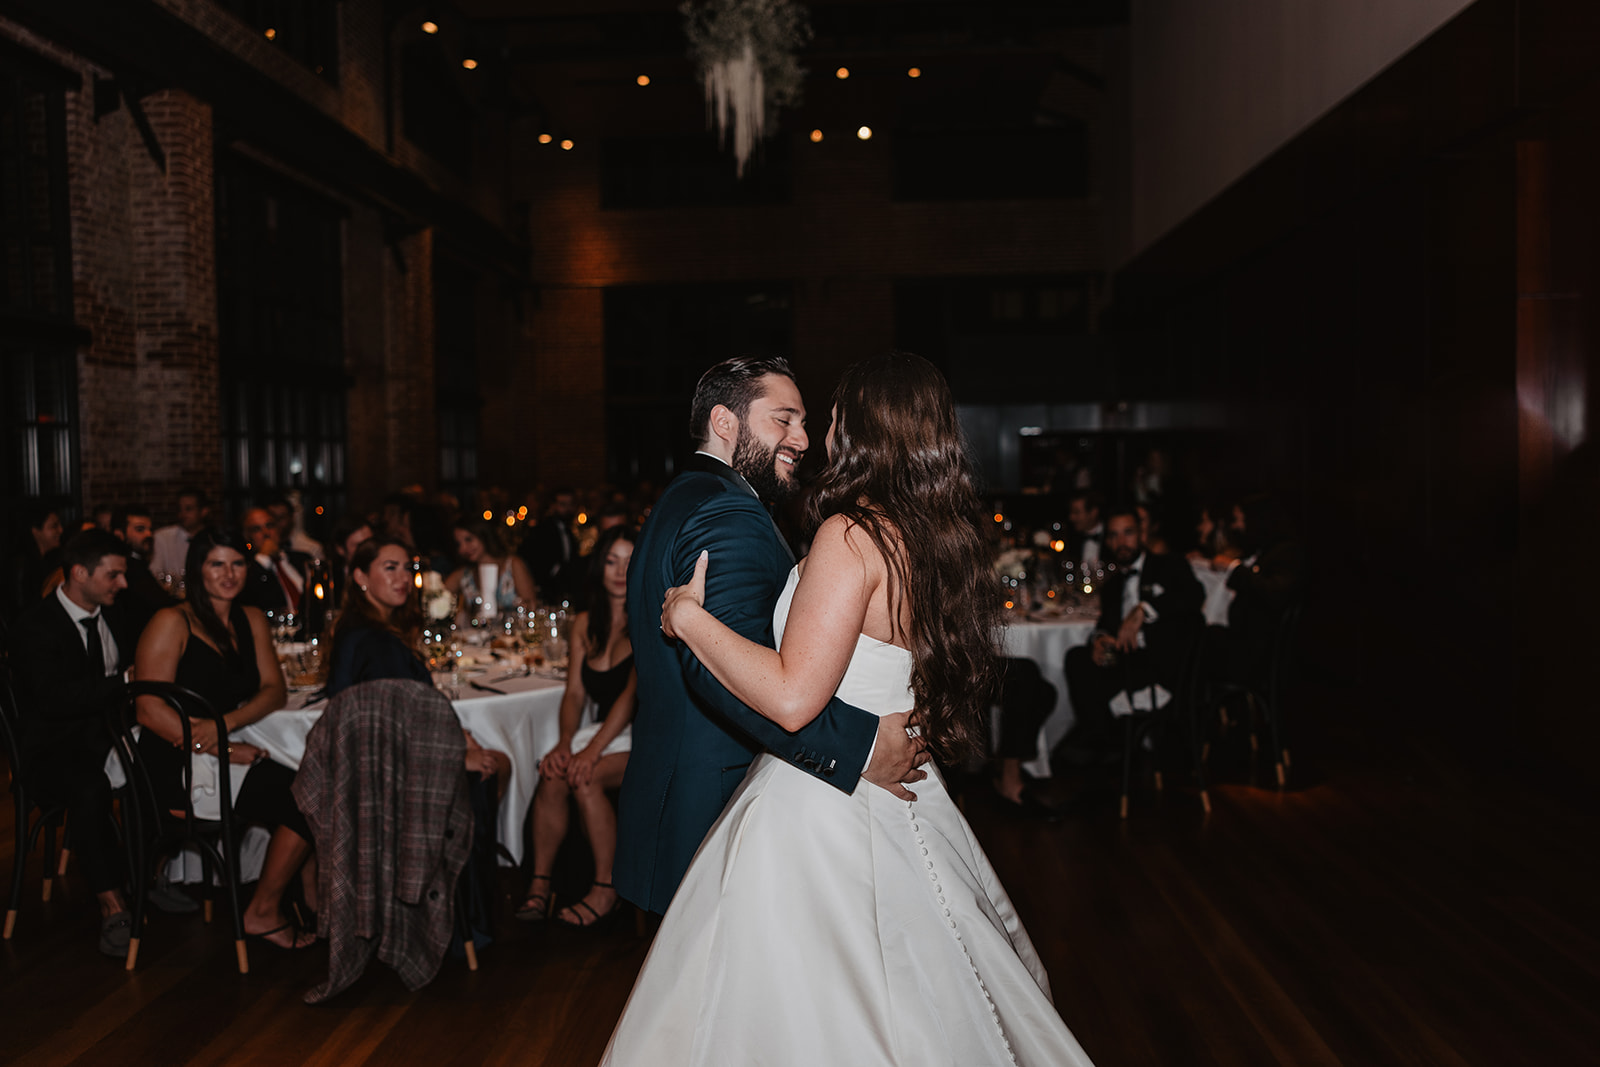 the bride and groom's first dance captured by the wedding photographer in Washington DC